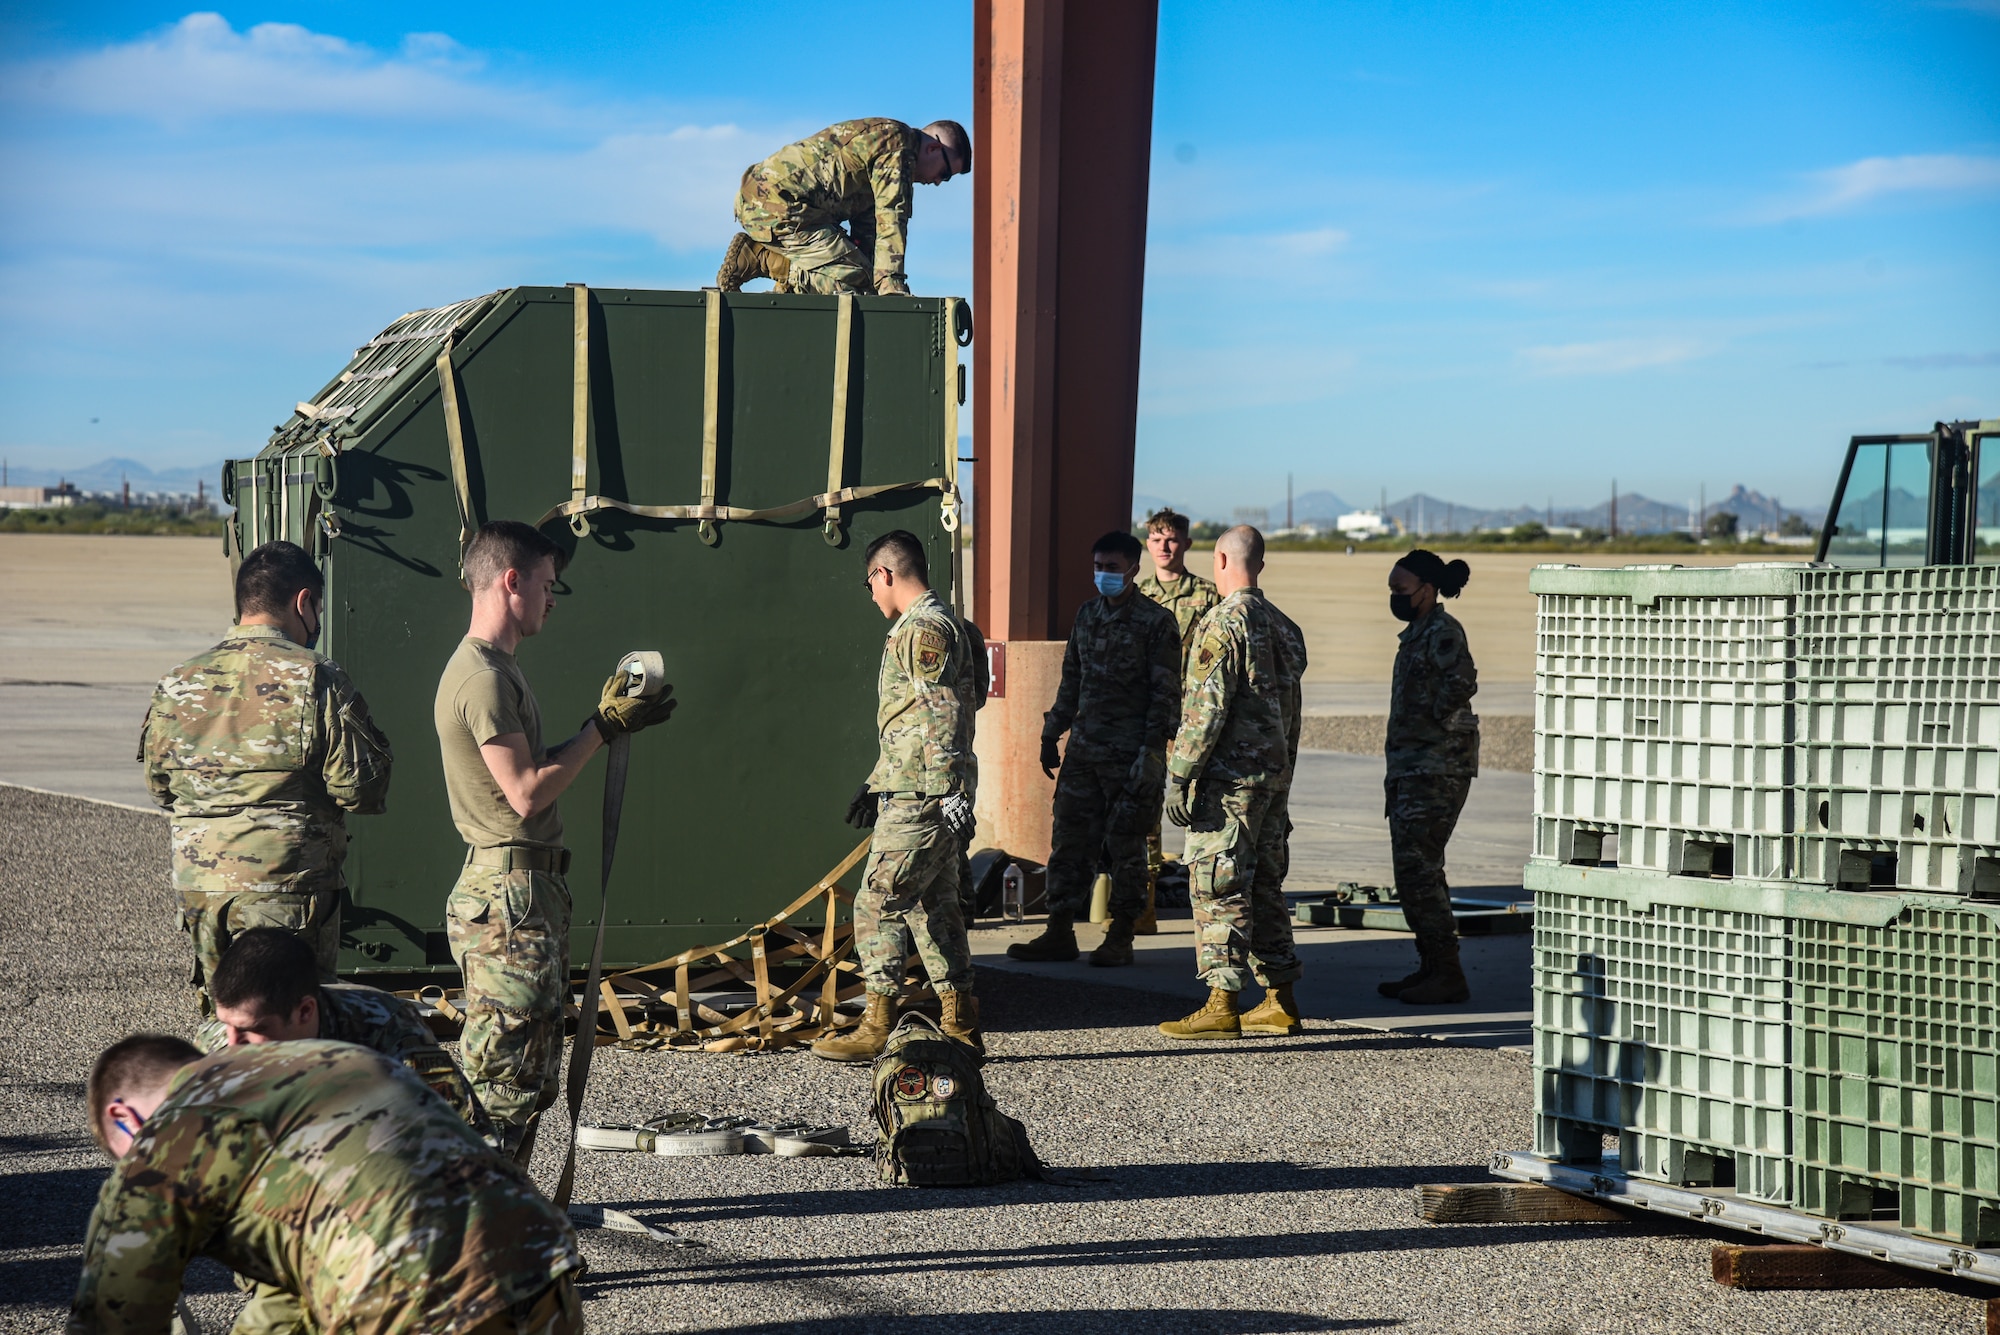 Pictured above is a group of Airmen removing the cargo net from a container and folding the netting.